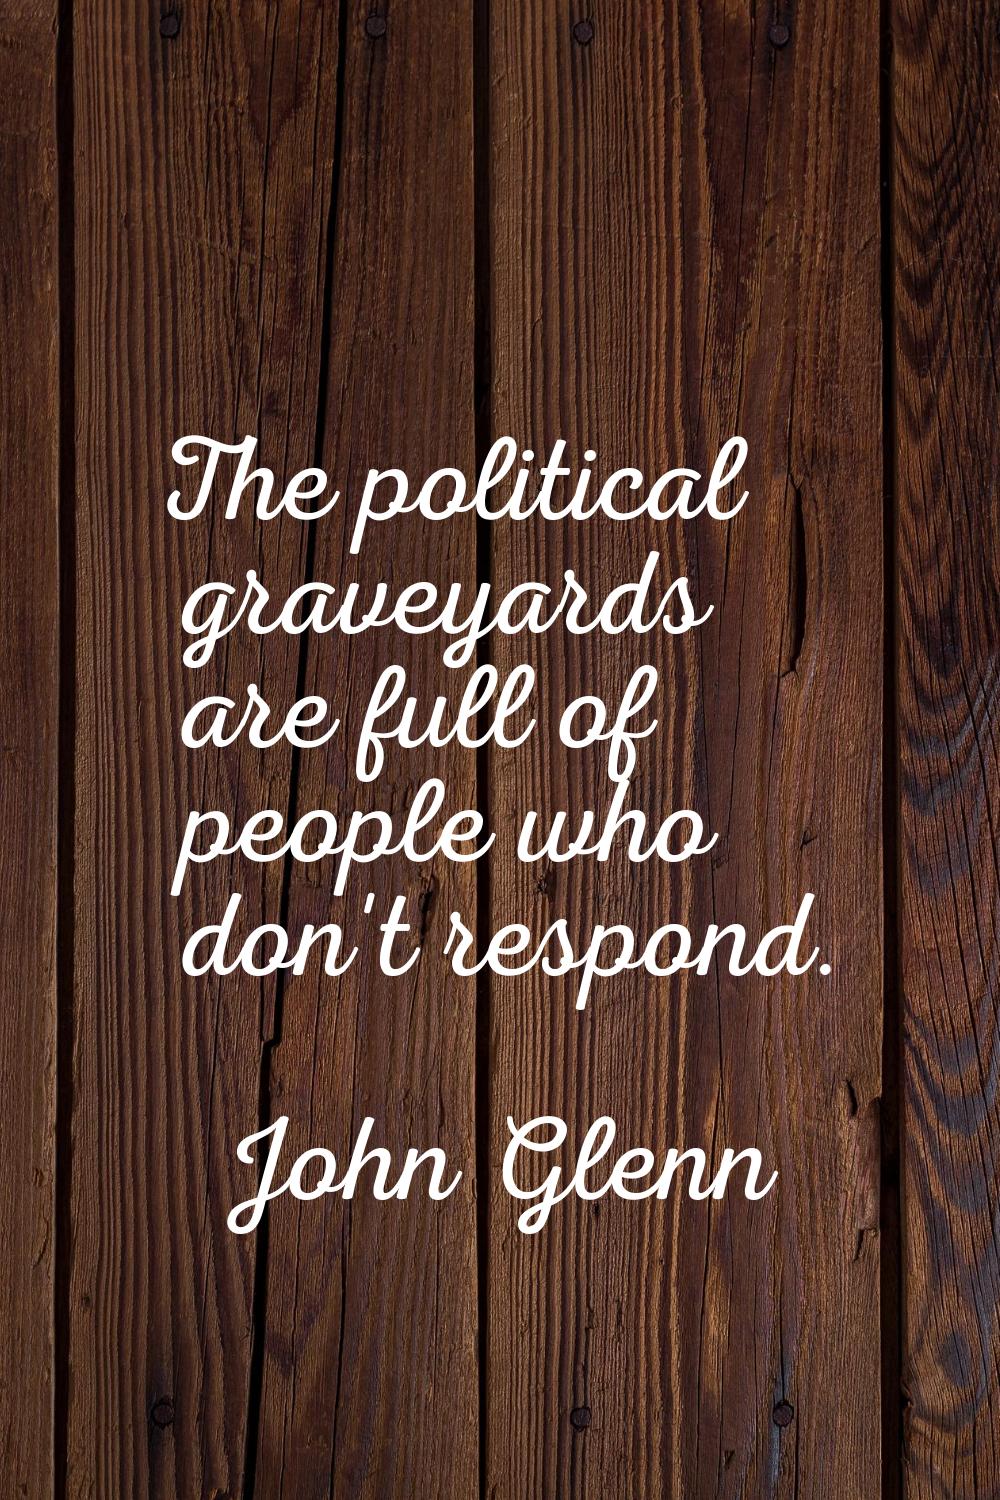 The political graveyards are full of people who don't respond.